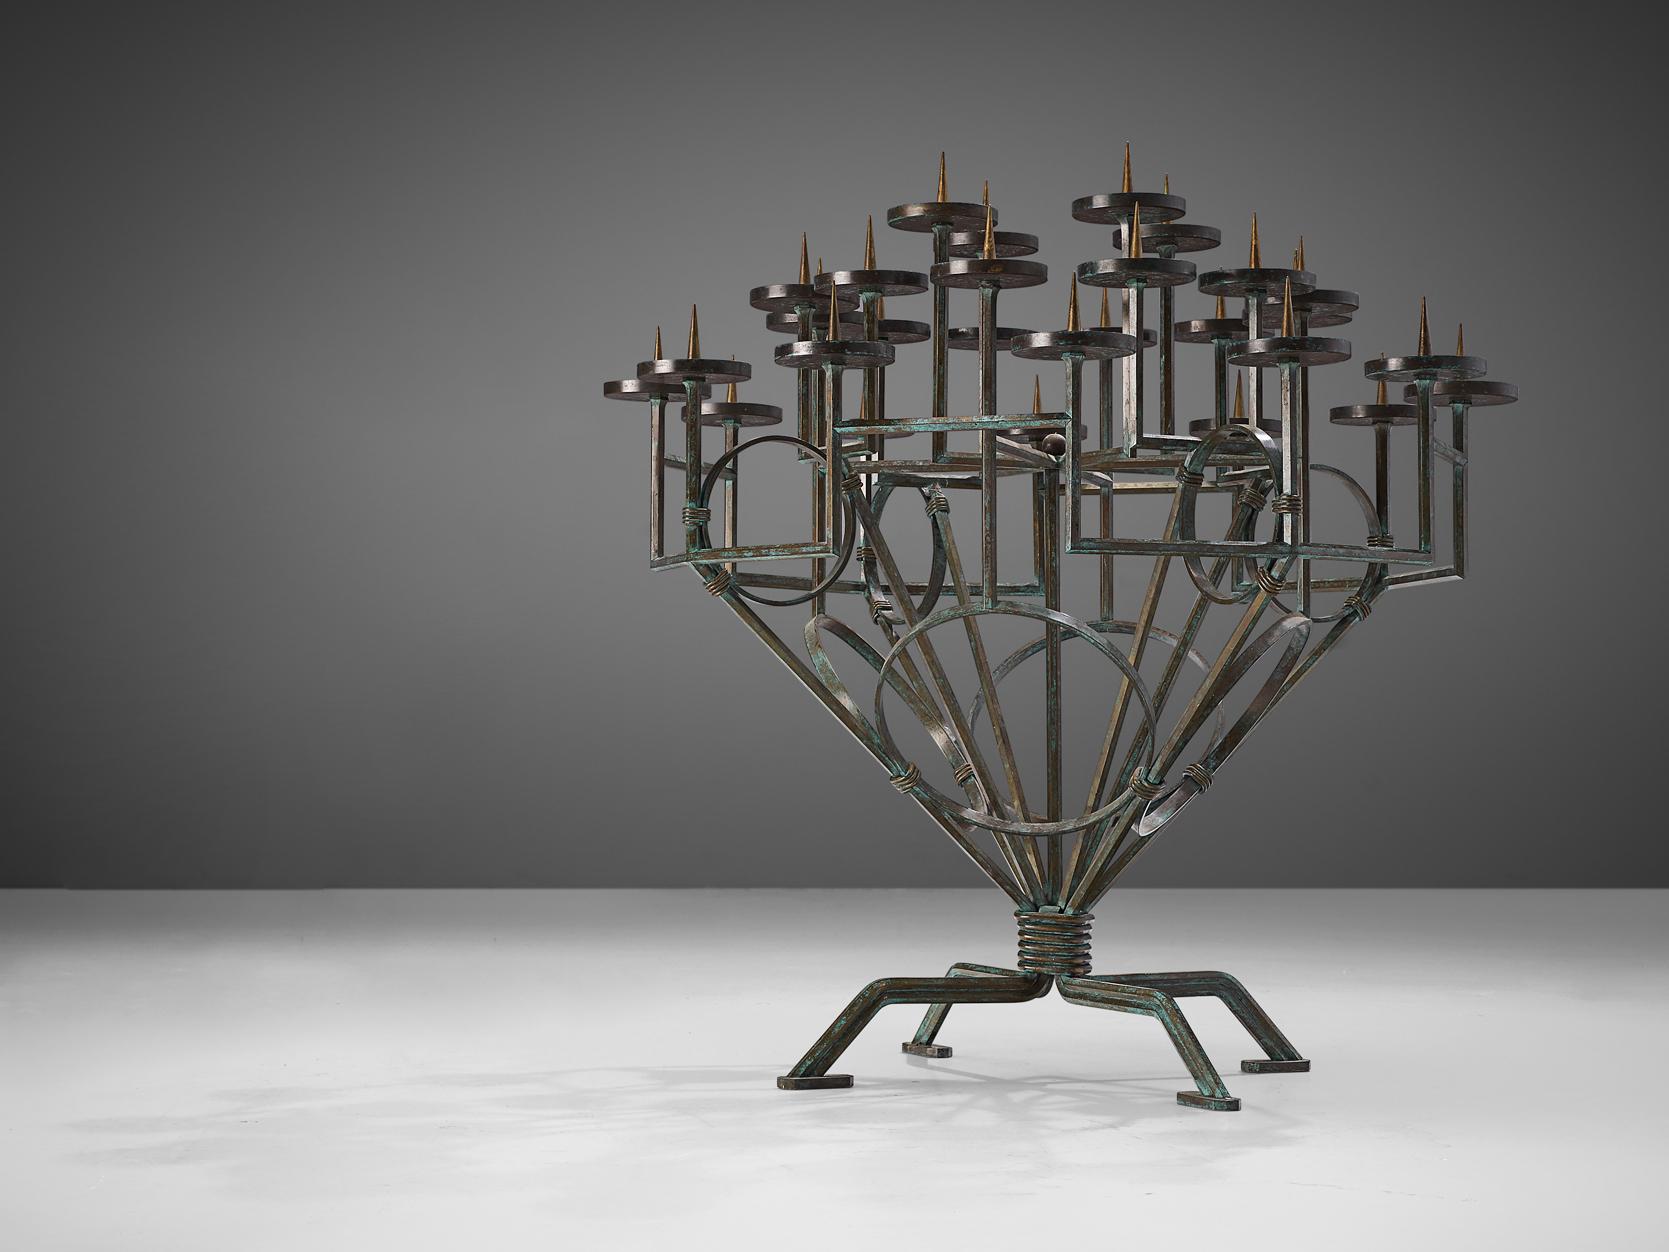 Candleholder, bronzed iron, Europe, early 20th century.

Large size candlebra that features a multitiered spread of candle holders organized in a circular manner from a central frame. The general color of these very decorative elements is green as